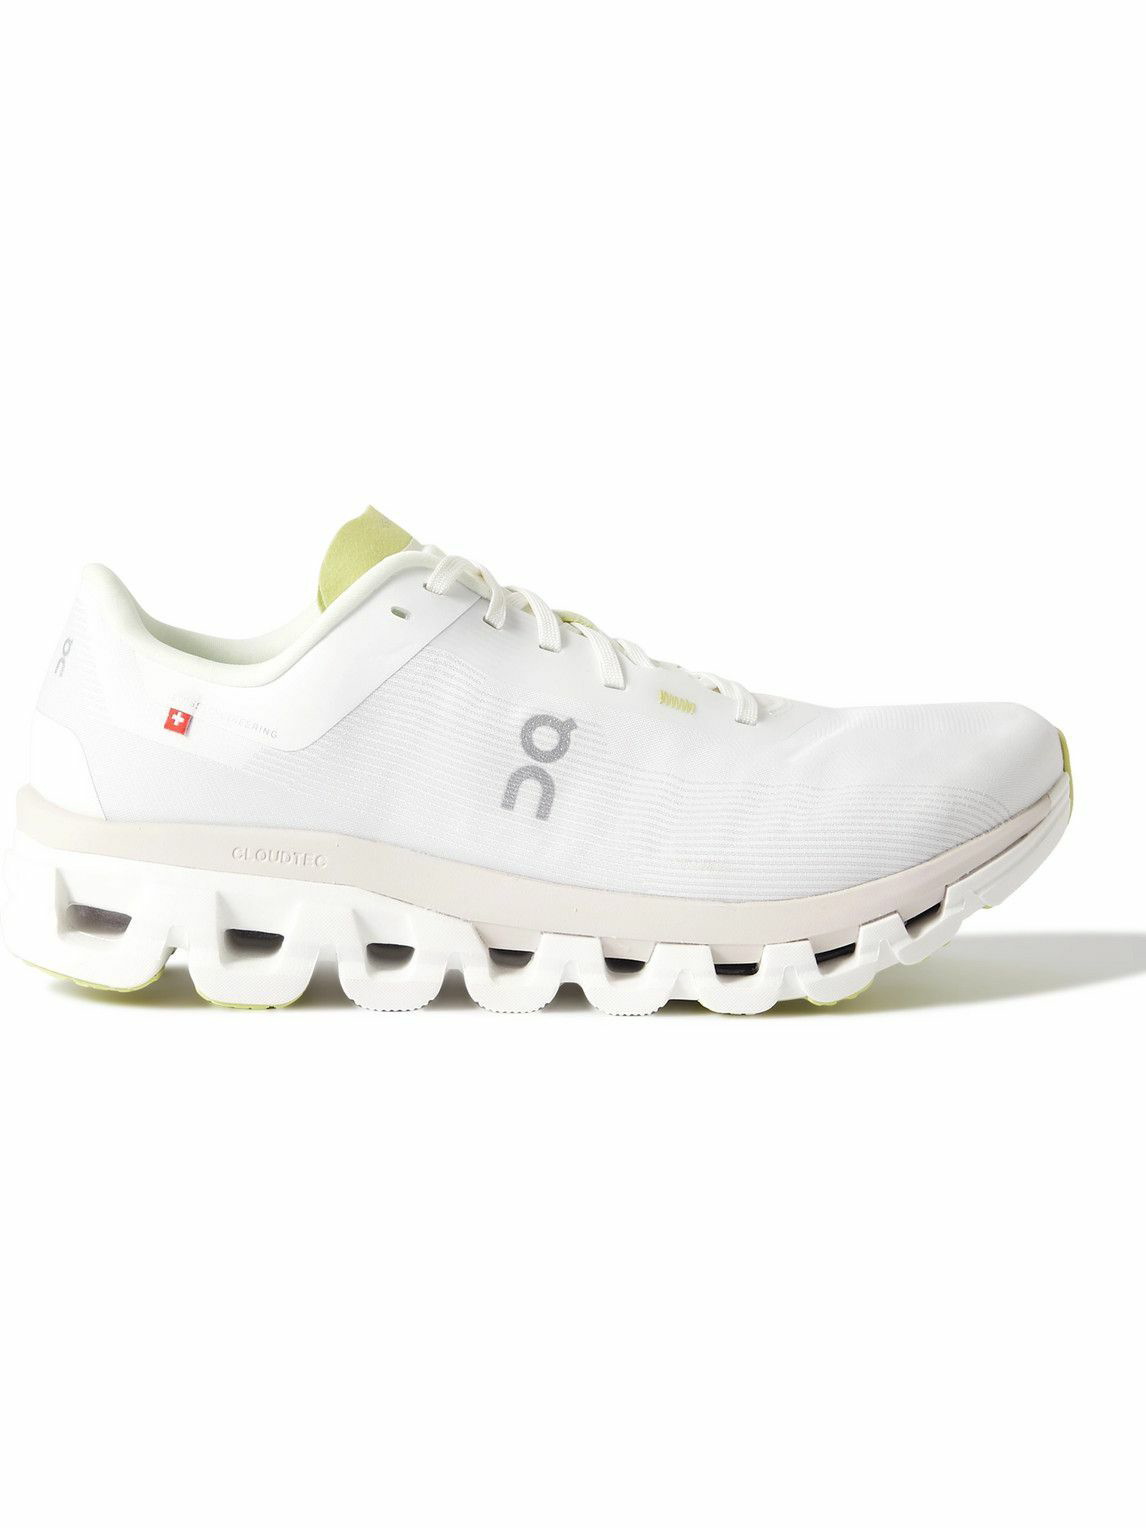 ON - Cloudflow 4 Rubber-Trimmed Mesh Running Sneakers - White On